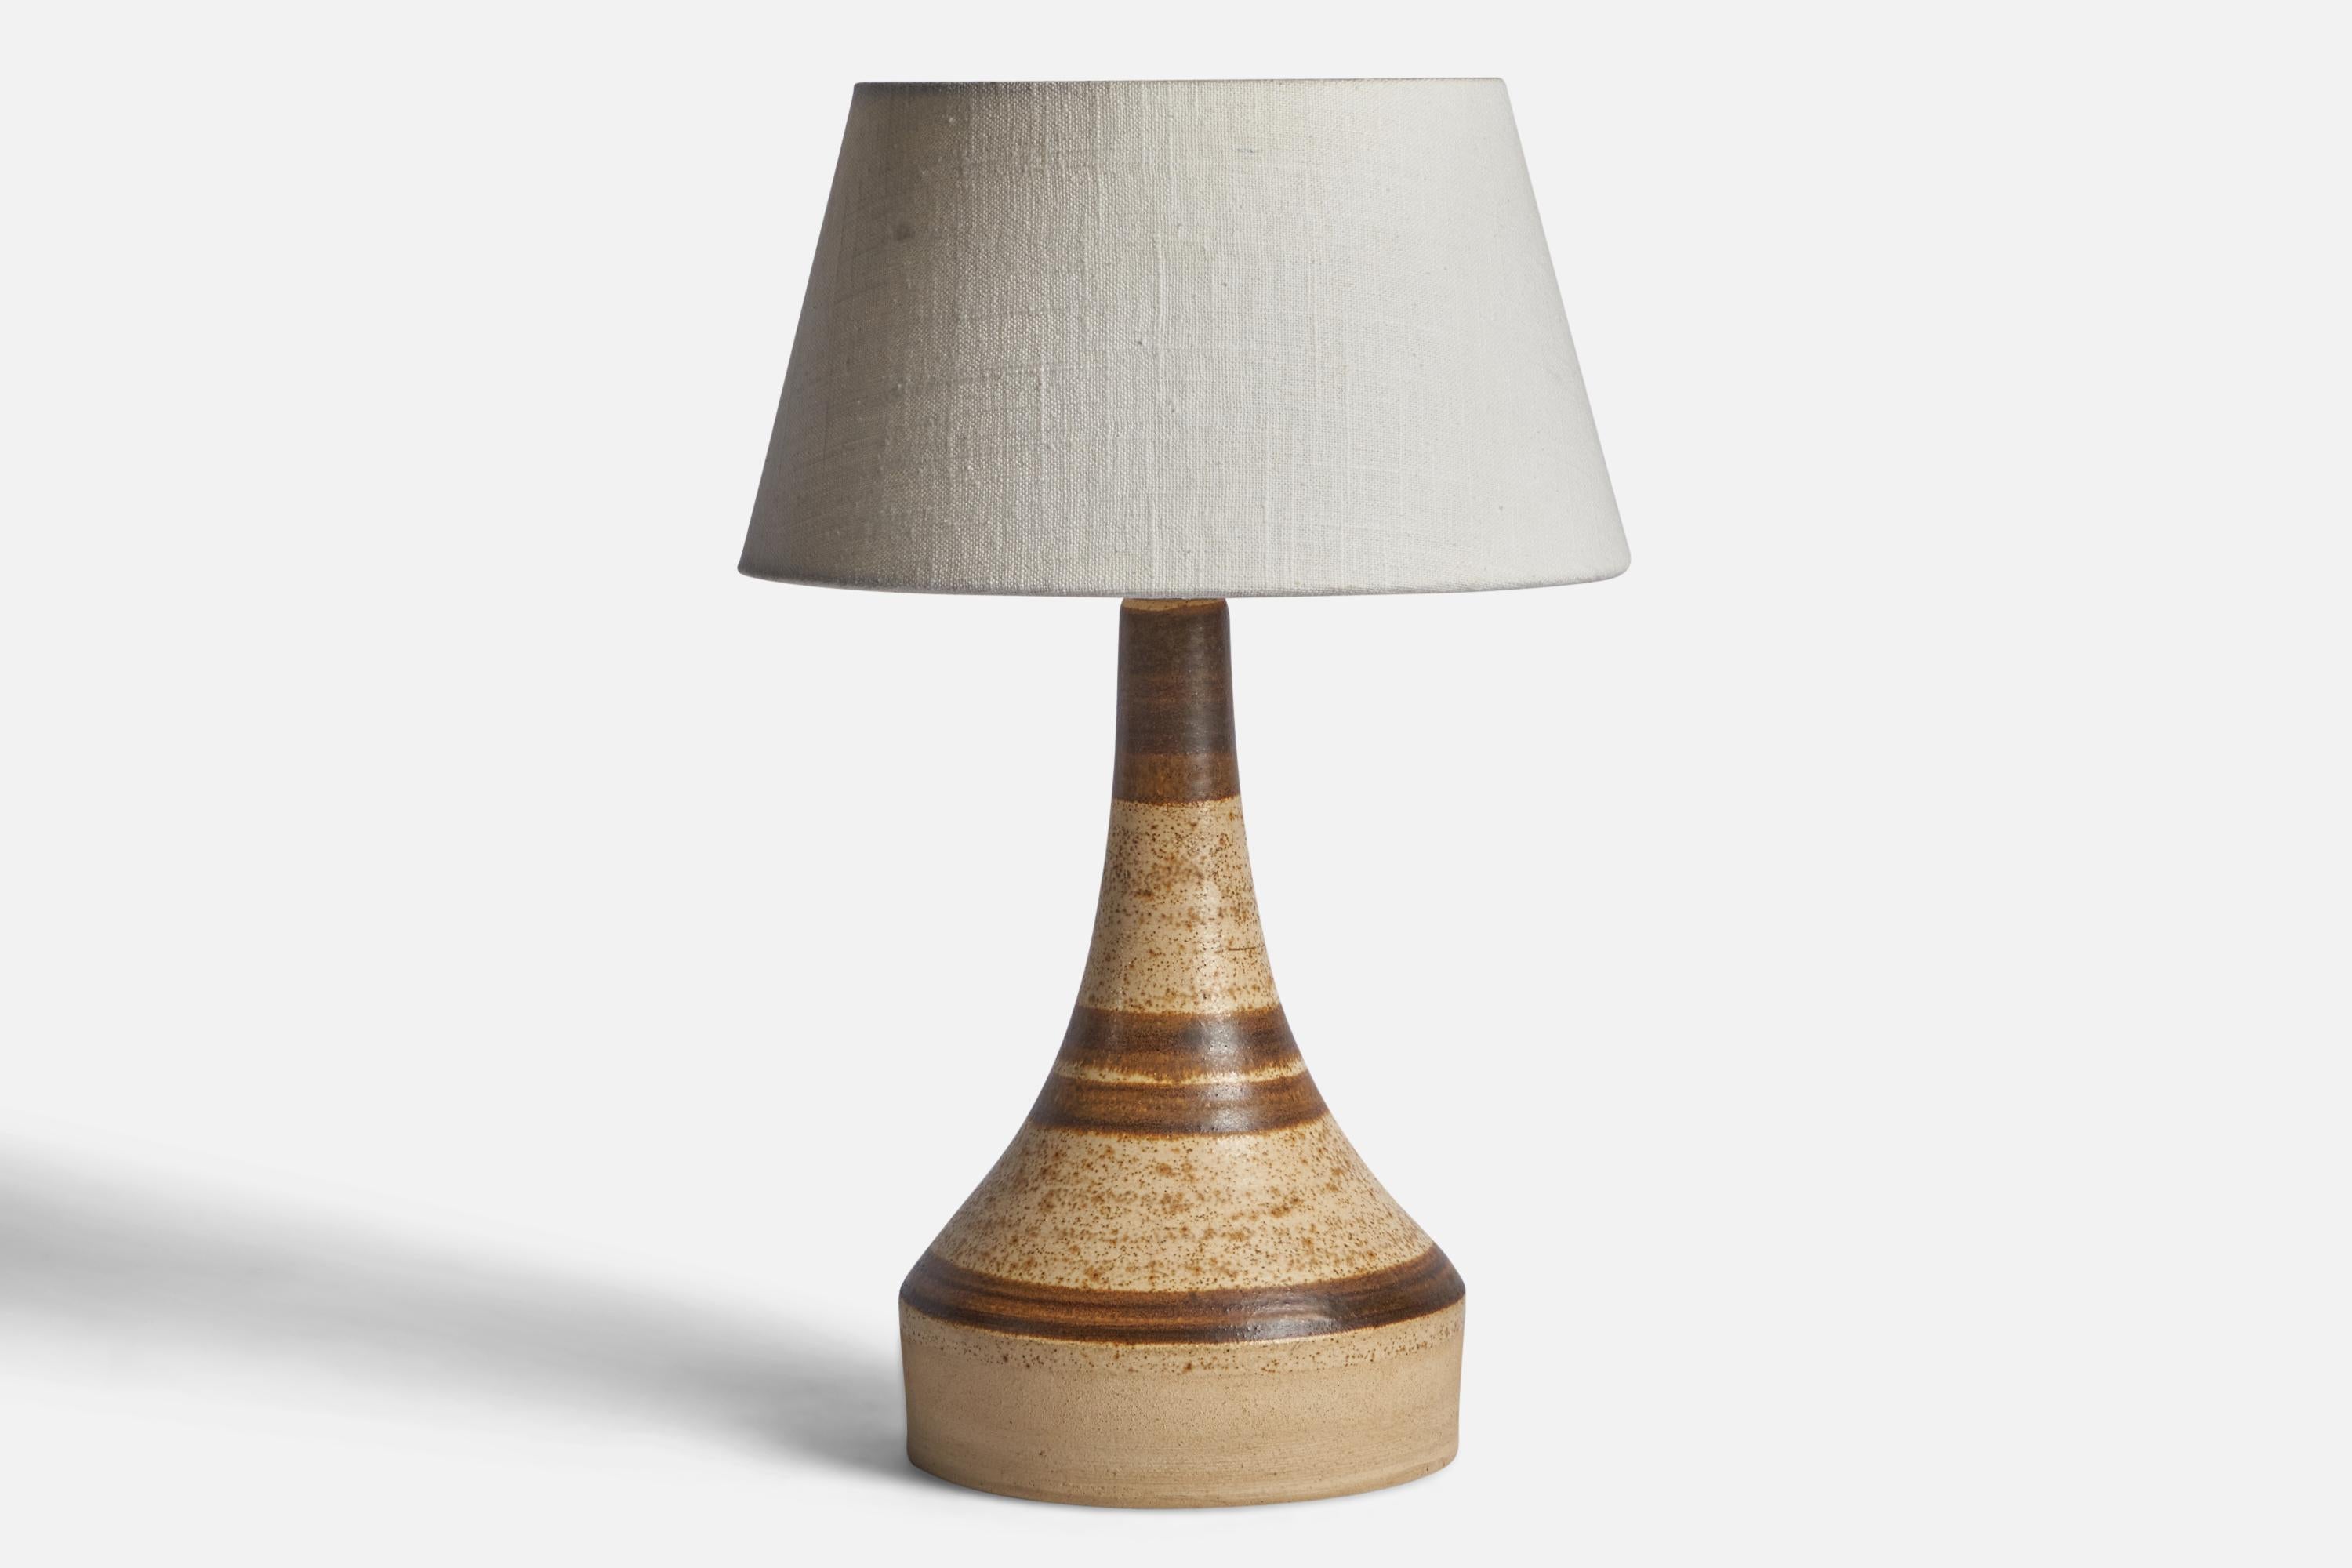 A beige and brown-glazed ceramic table lamp designed and produced in Denmark, c. 1960s.

Dimensions of Lamp (inches): 13” H x 6.3” Diameter
Dimensions of Shade (inches): 7” Top Diameter x 10” Bottom Diameter x 5.5” H 
Dimensions of Lamp with Shade